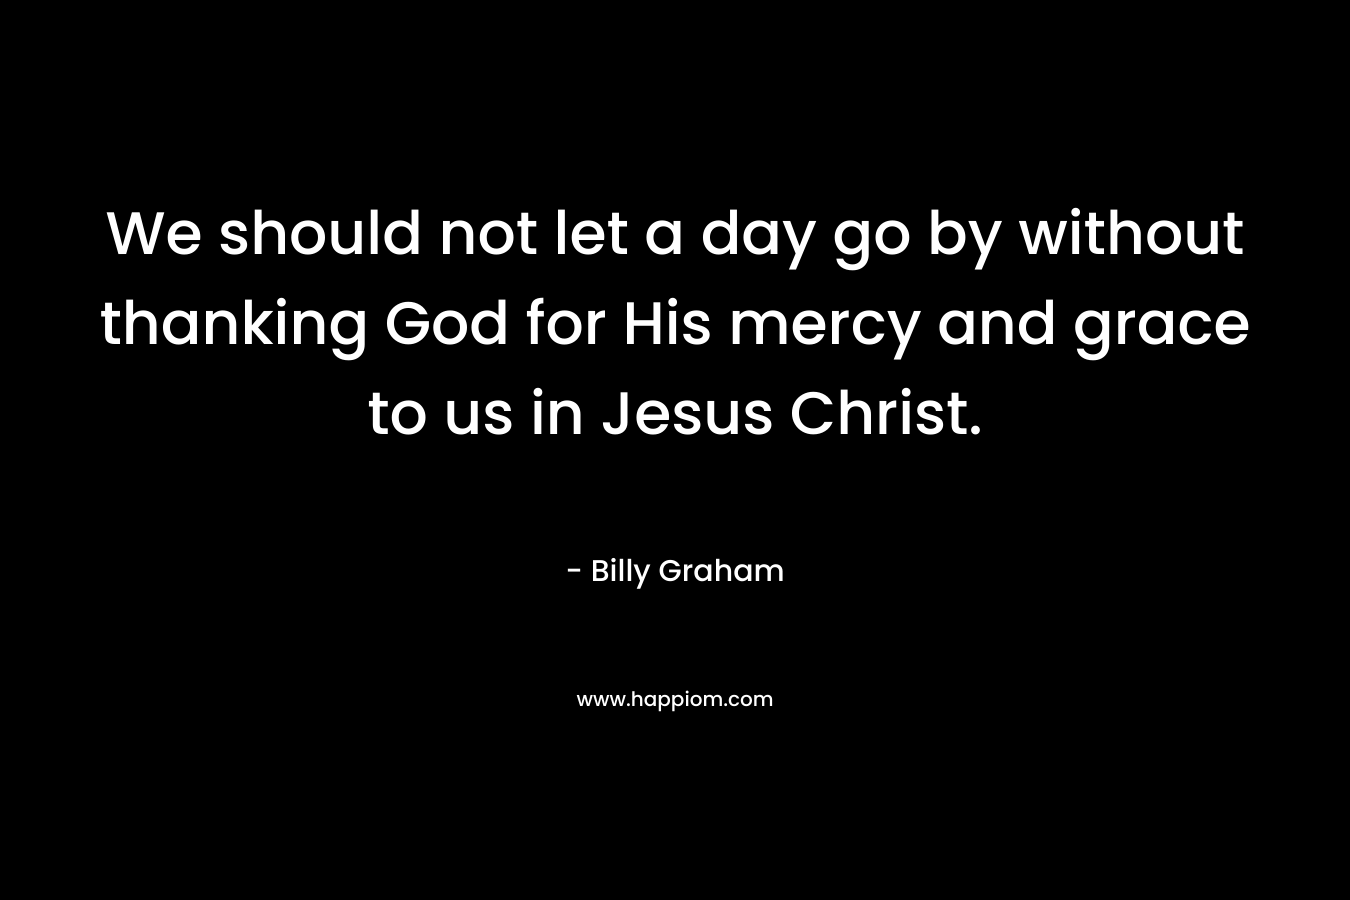 We should not let a day go by without thanking God for His mercy and grace to us in Jesus Christ.